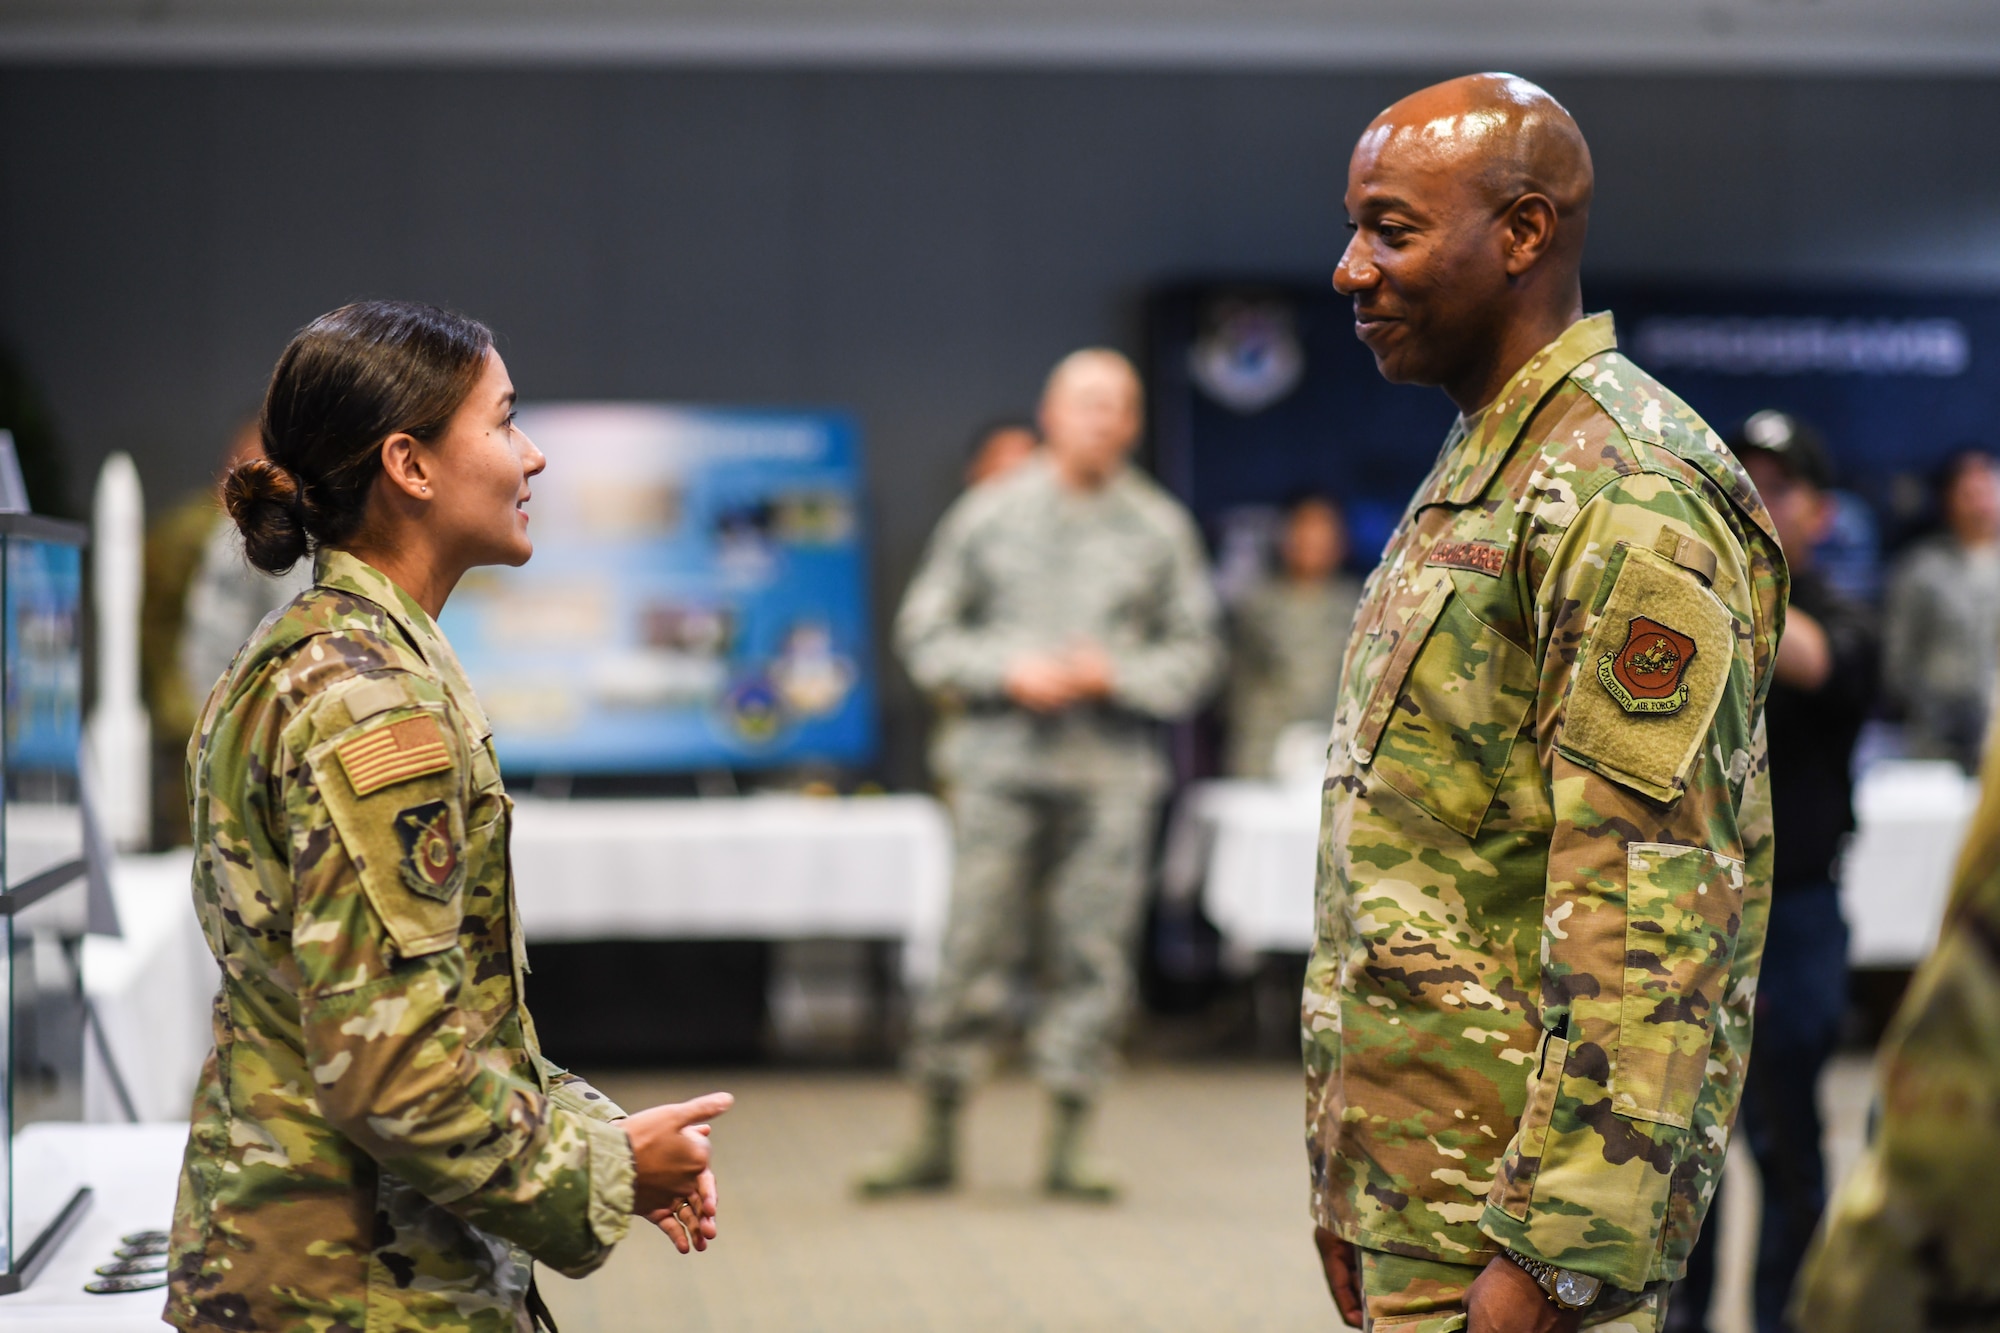 Chief Master Sgt. of the Air Force Kaleth O. Wright speaks with 1st Lt. Alejandra Mejia for a mission area briefing while visiting Los Angeles Air Force Base, El Segundo, Calif., Sept. 26, 2019. While there, he met with Airmen, received mission area briefings, and had an opportunity to view the unique characteristics of SMC and the capabilities that the total force offers to accomplish the mission at Los Angeles AFB. 
(U.S. Air Force photo by Van De Ha)